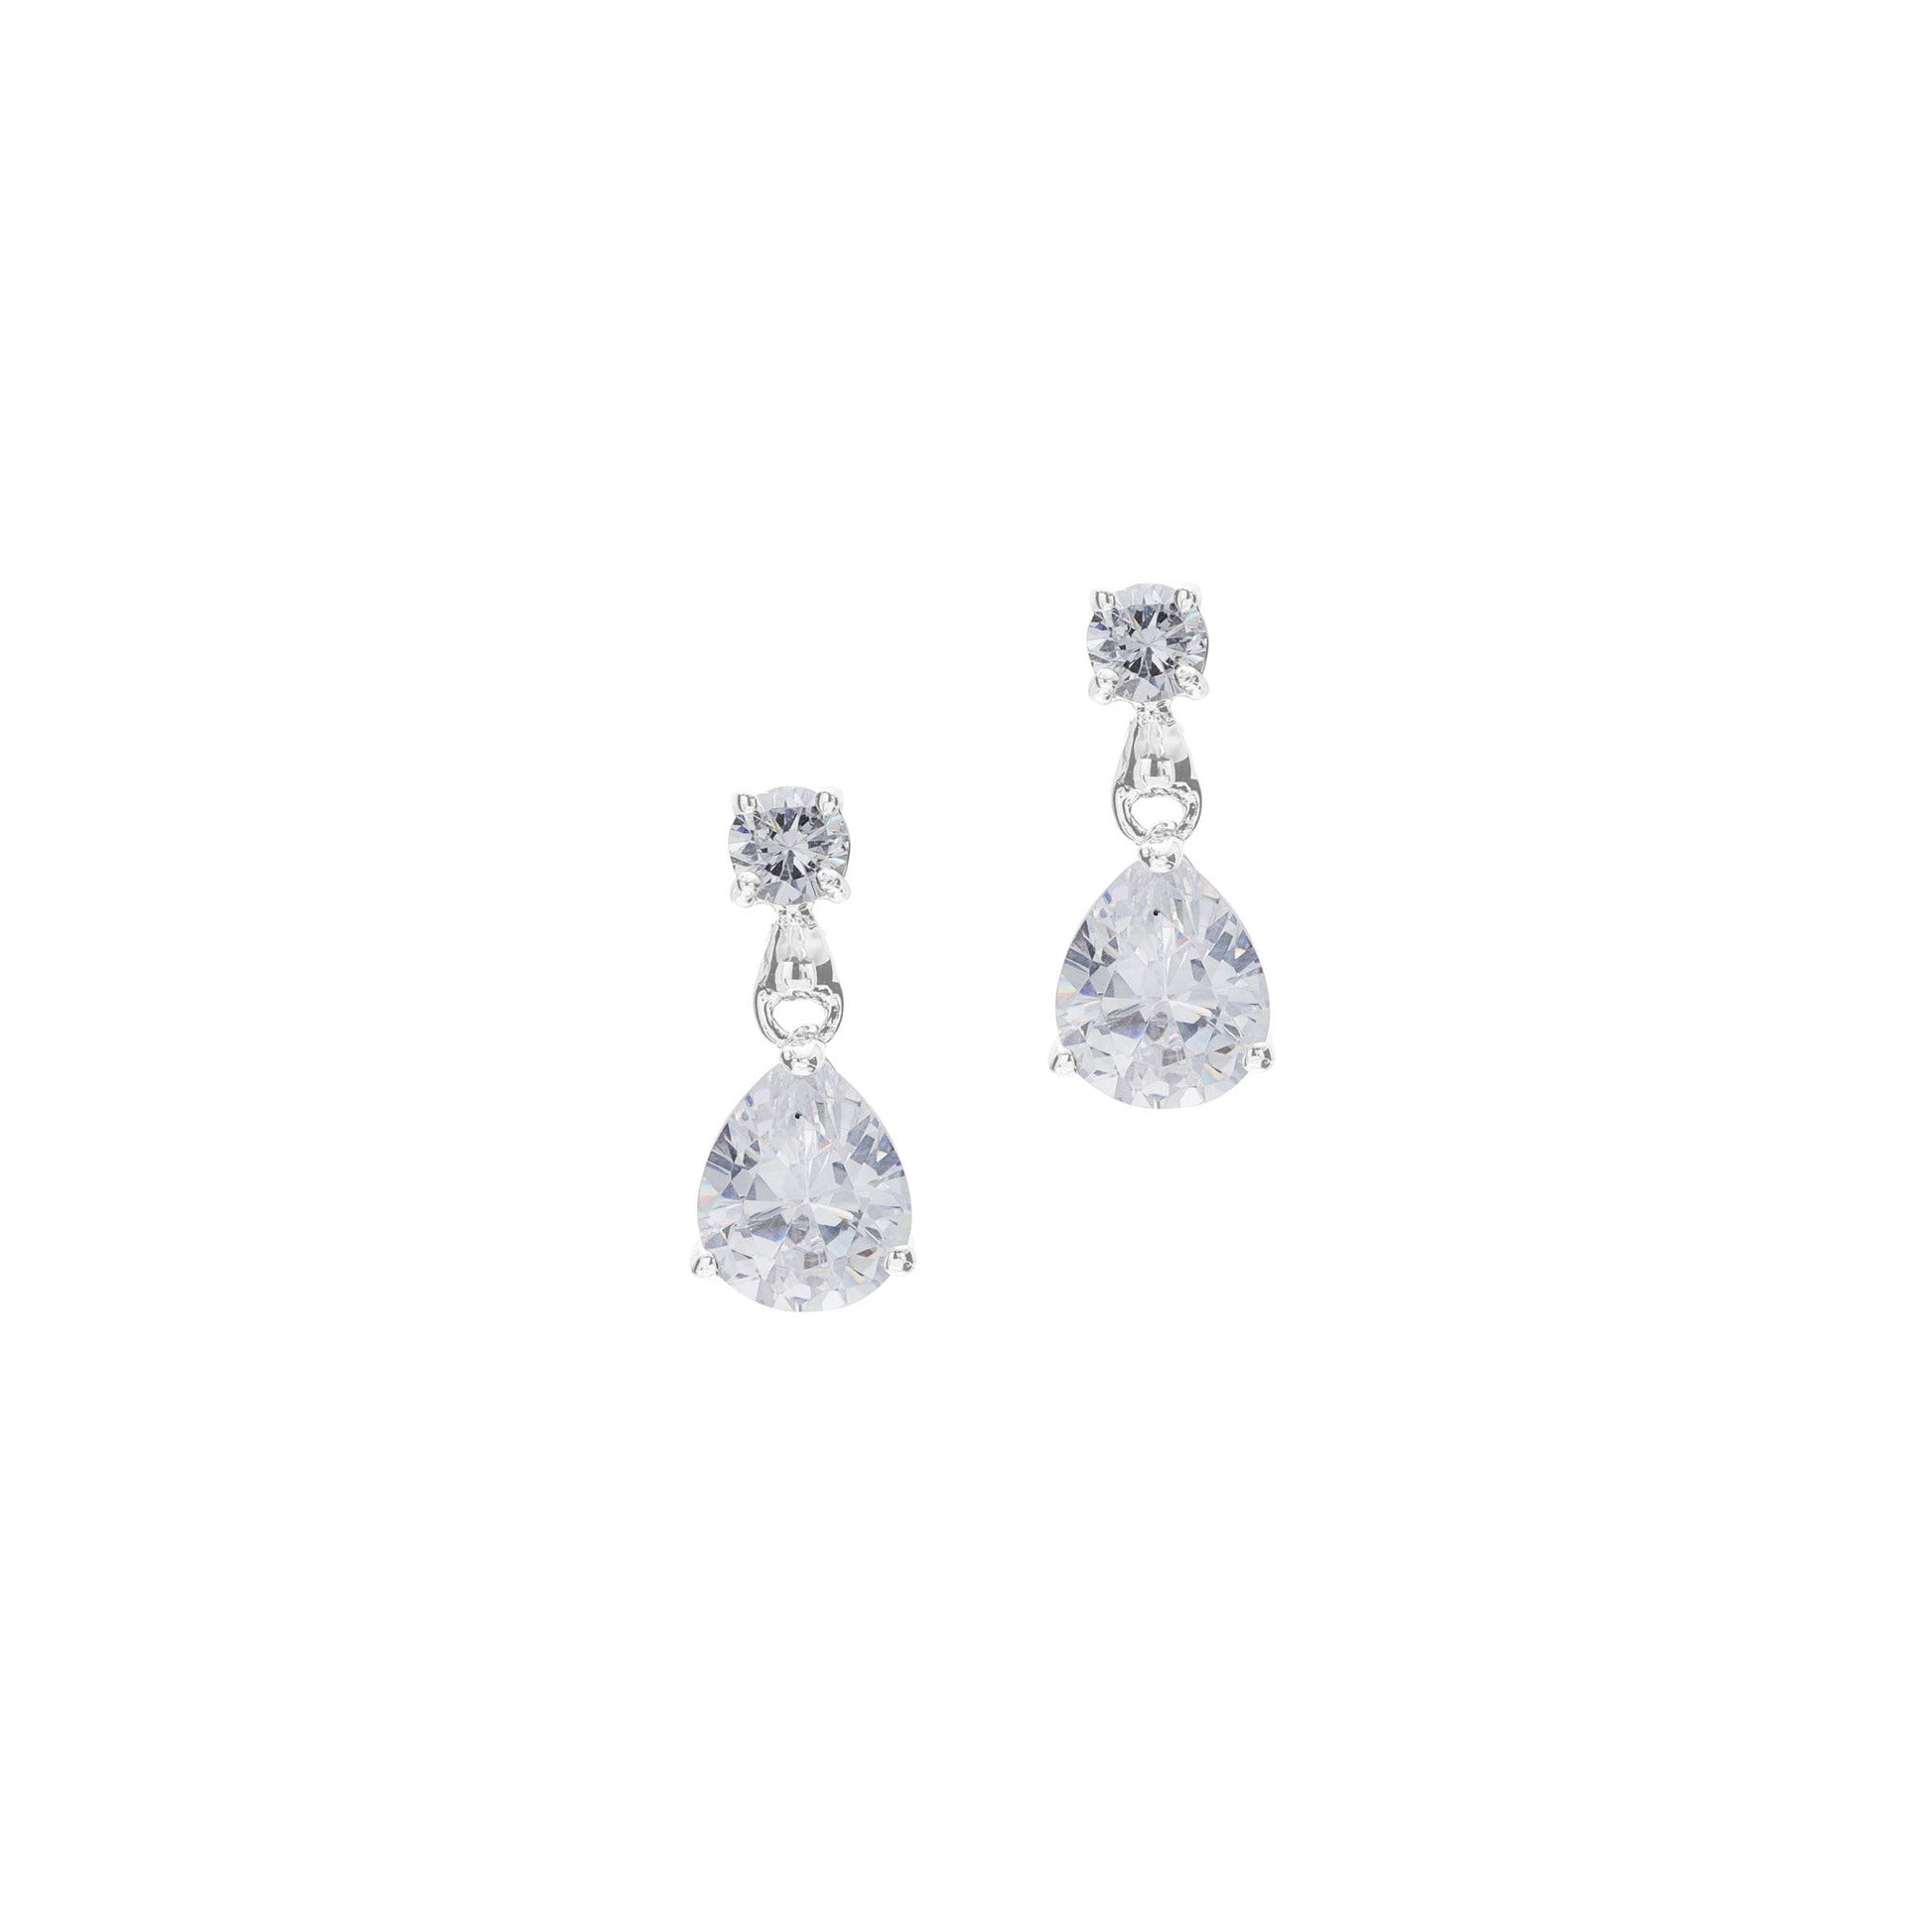 A teardrop and round simulated diamond earrings displayed on a neutral white background.